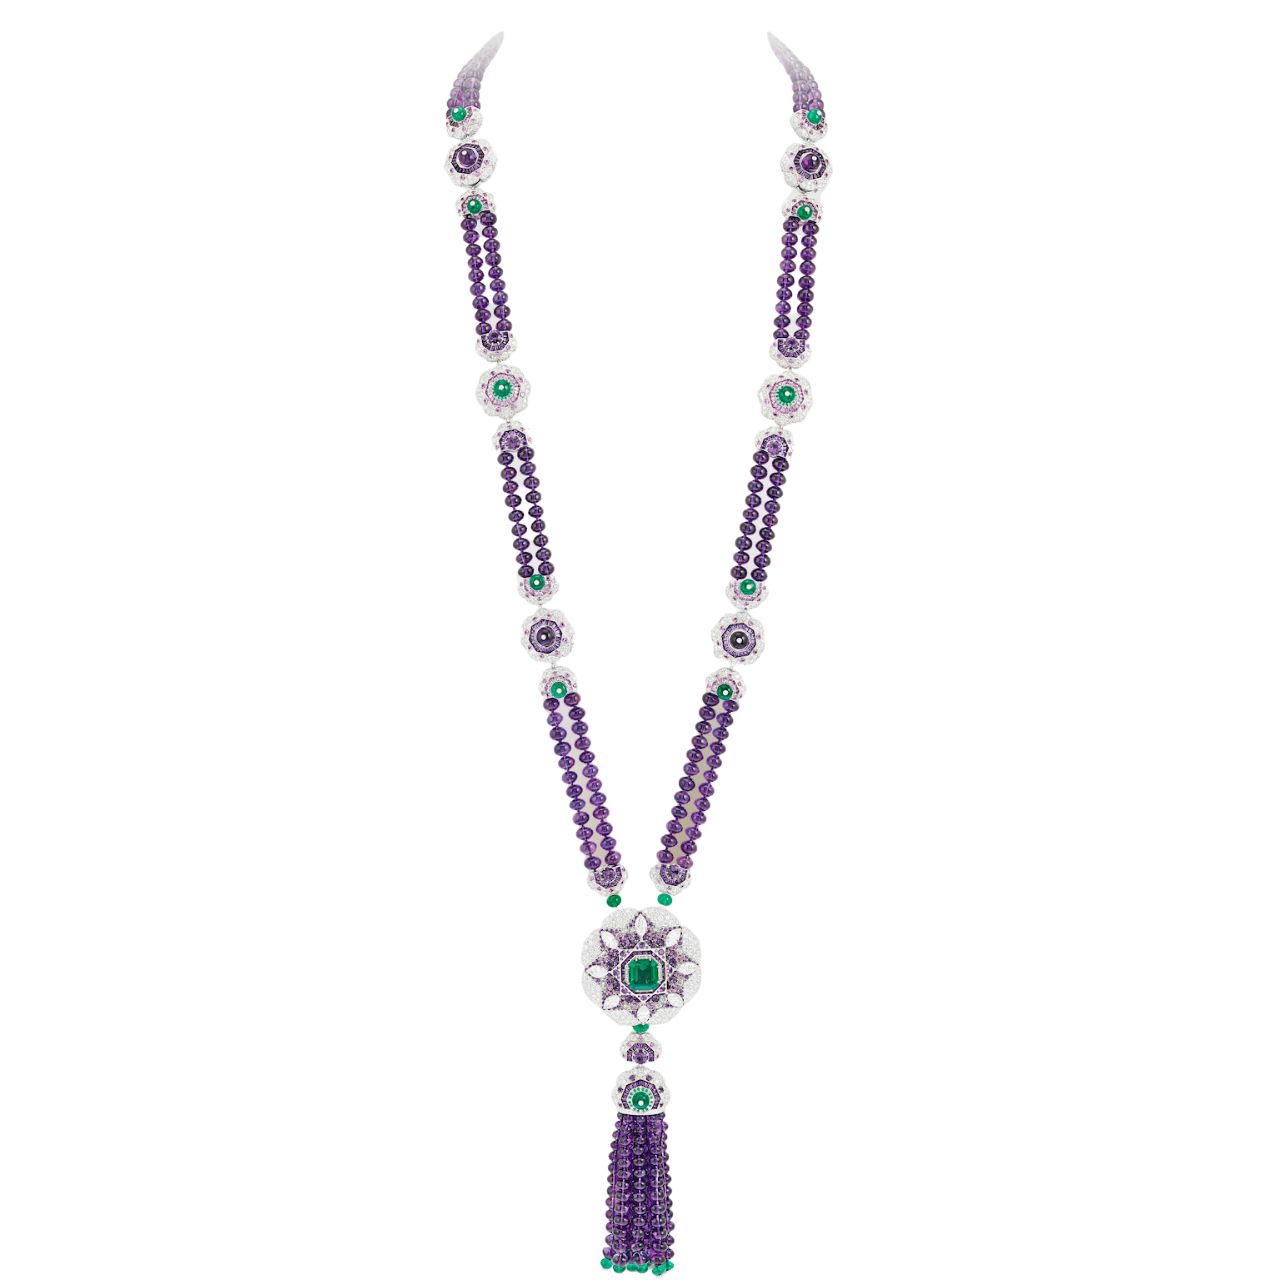 Delphinium necklace featuring a 5.33-carat emerald-cut emerald, pink sapphires, amethysts, and diamonds set in 18k white gold and platinum.